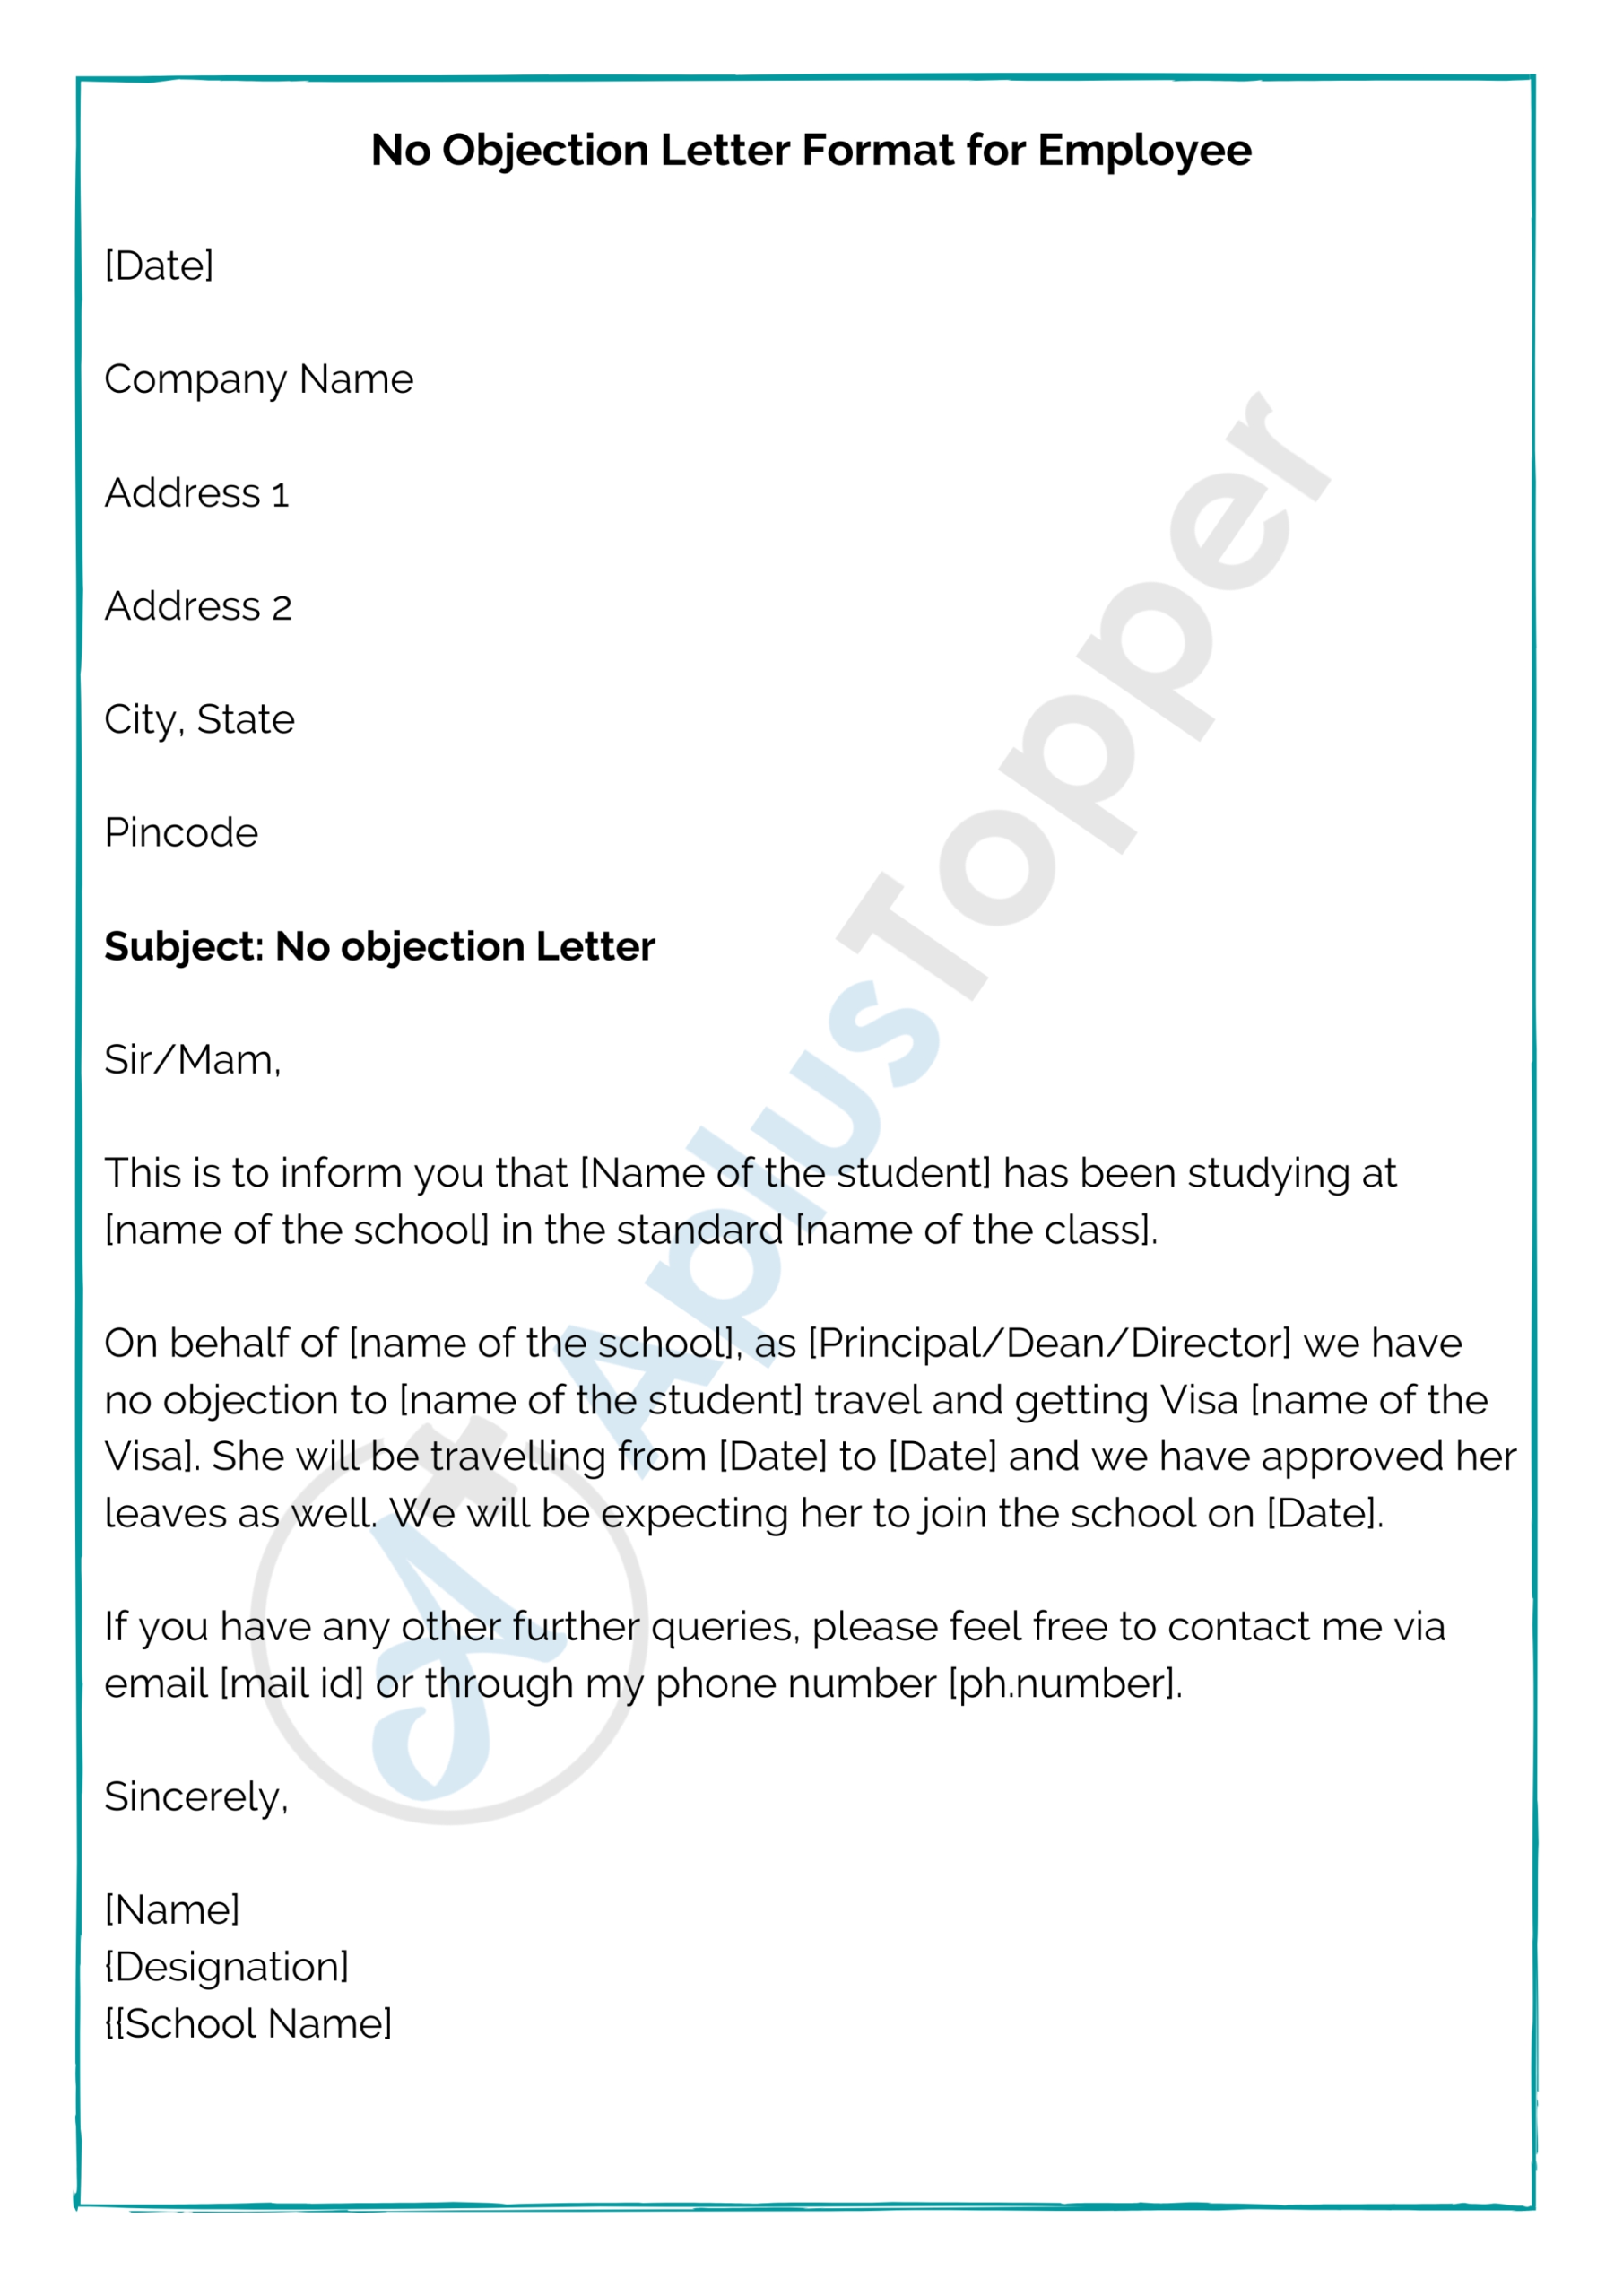 No Objection Letter | Format, Samples, How To Write No Objection Letter with Letter Of Objection Template